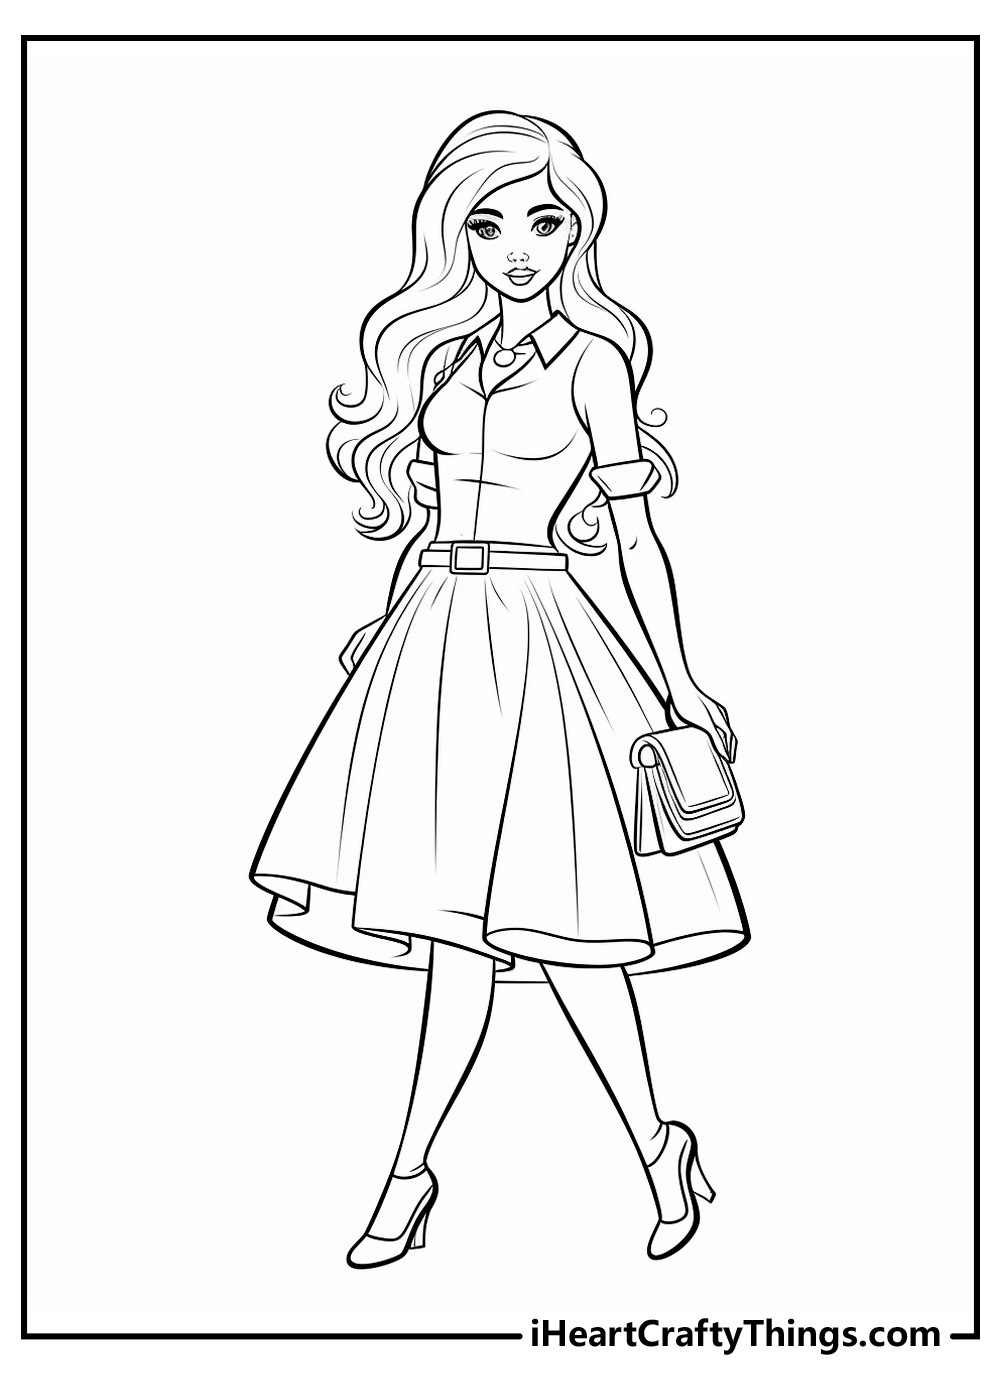 Roblox Girl Coloring Pages - 2 Free Coloring Sheets (2021)  Coloring pages  for girls, Free printable coloring sheets, Princess coloring pages